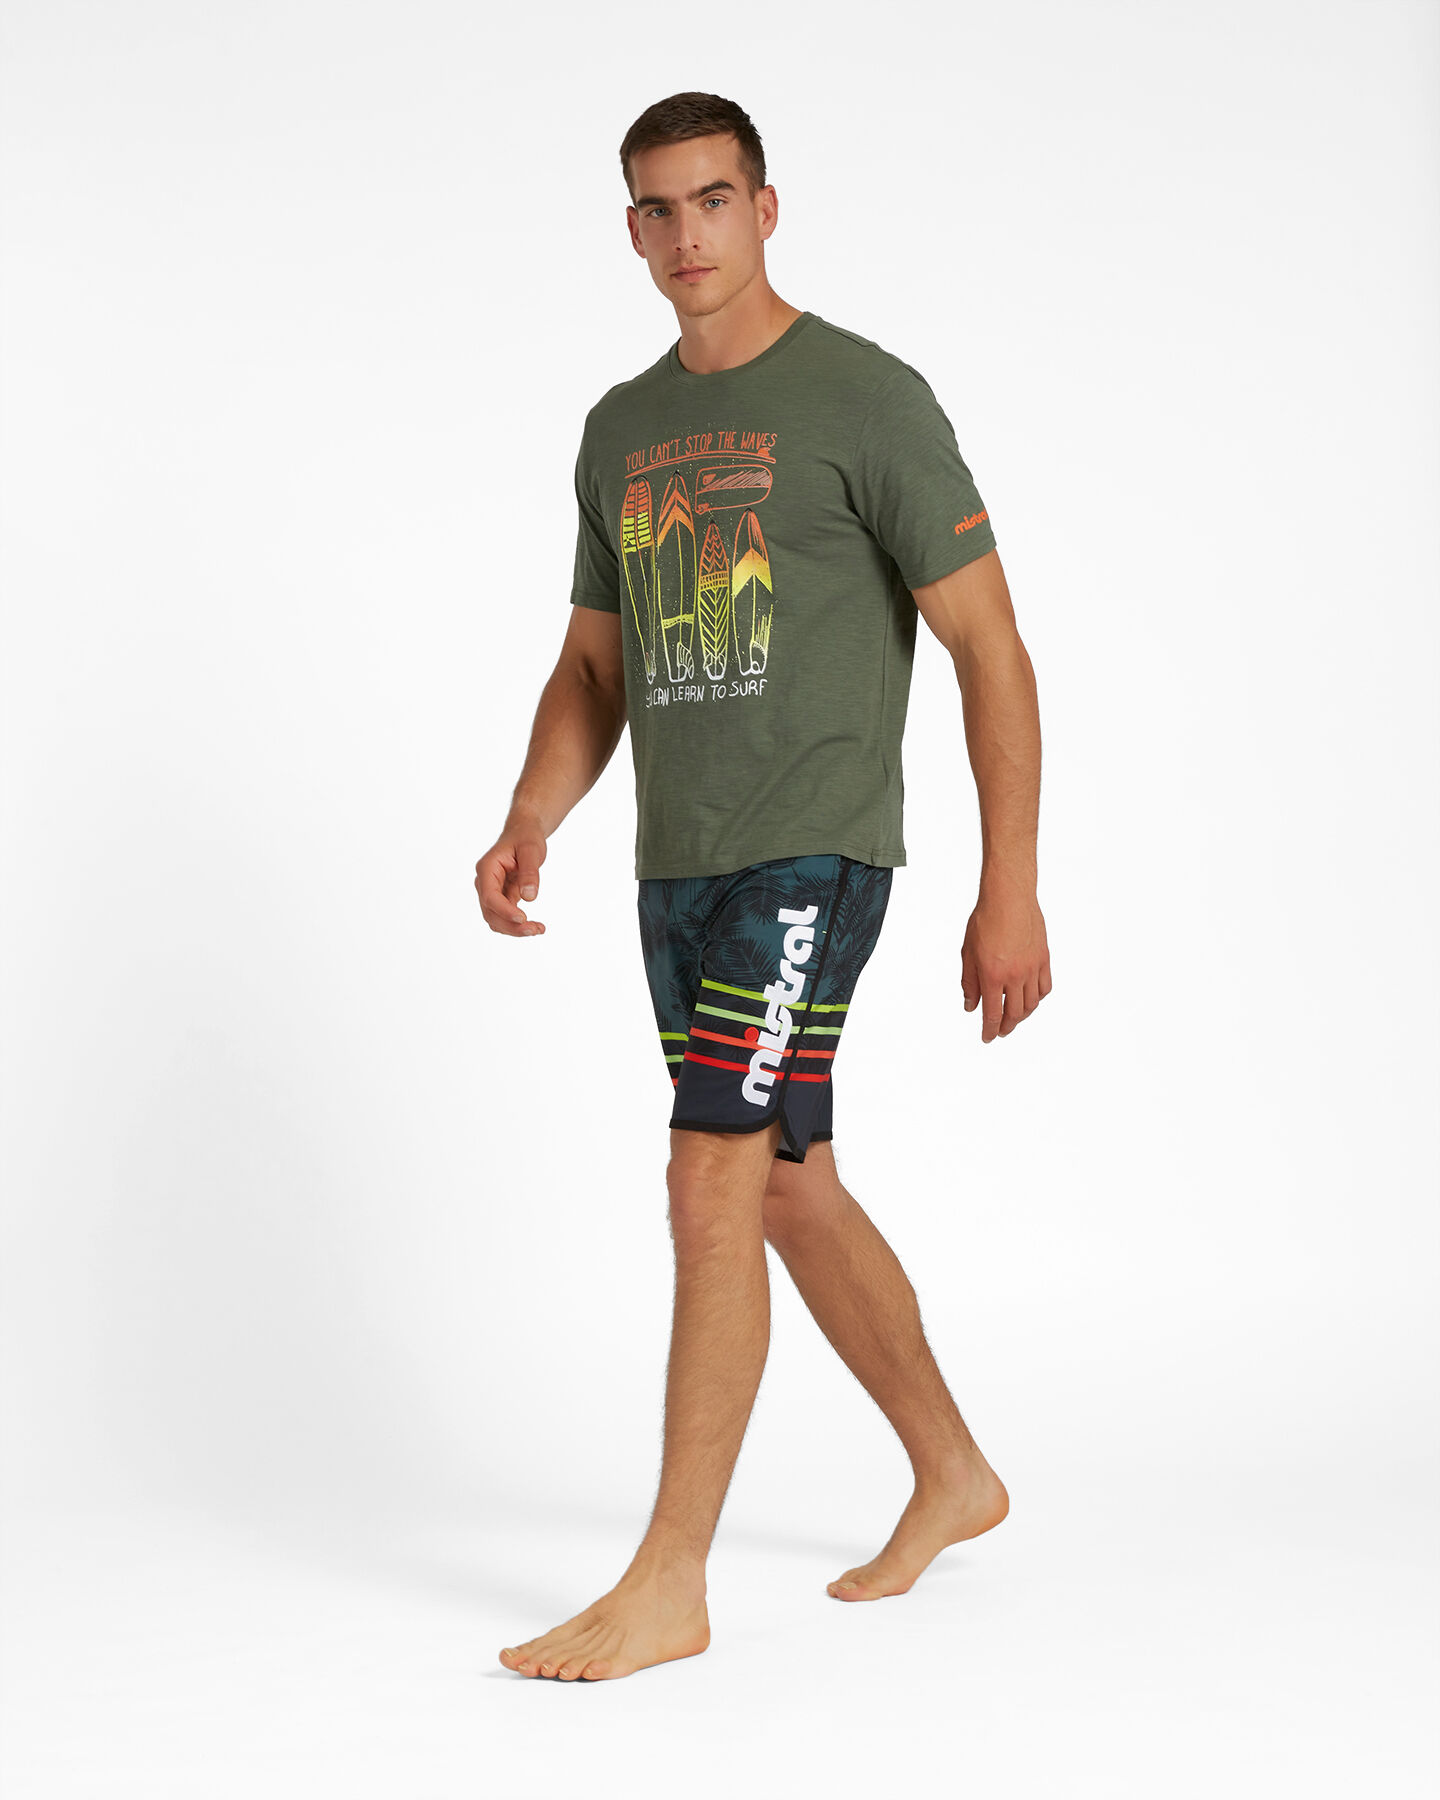  T-Shirt MISTRAL SURF M S4089663|783|S scatto 3